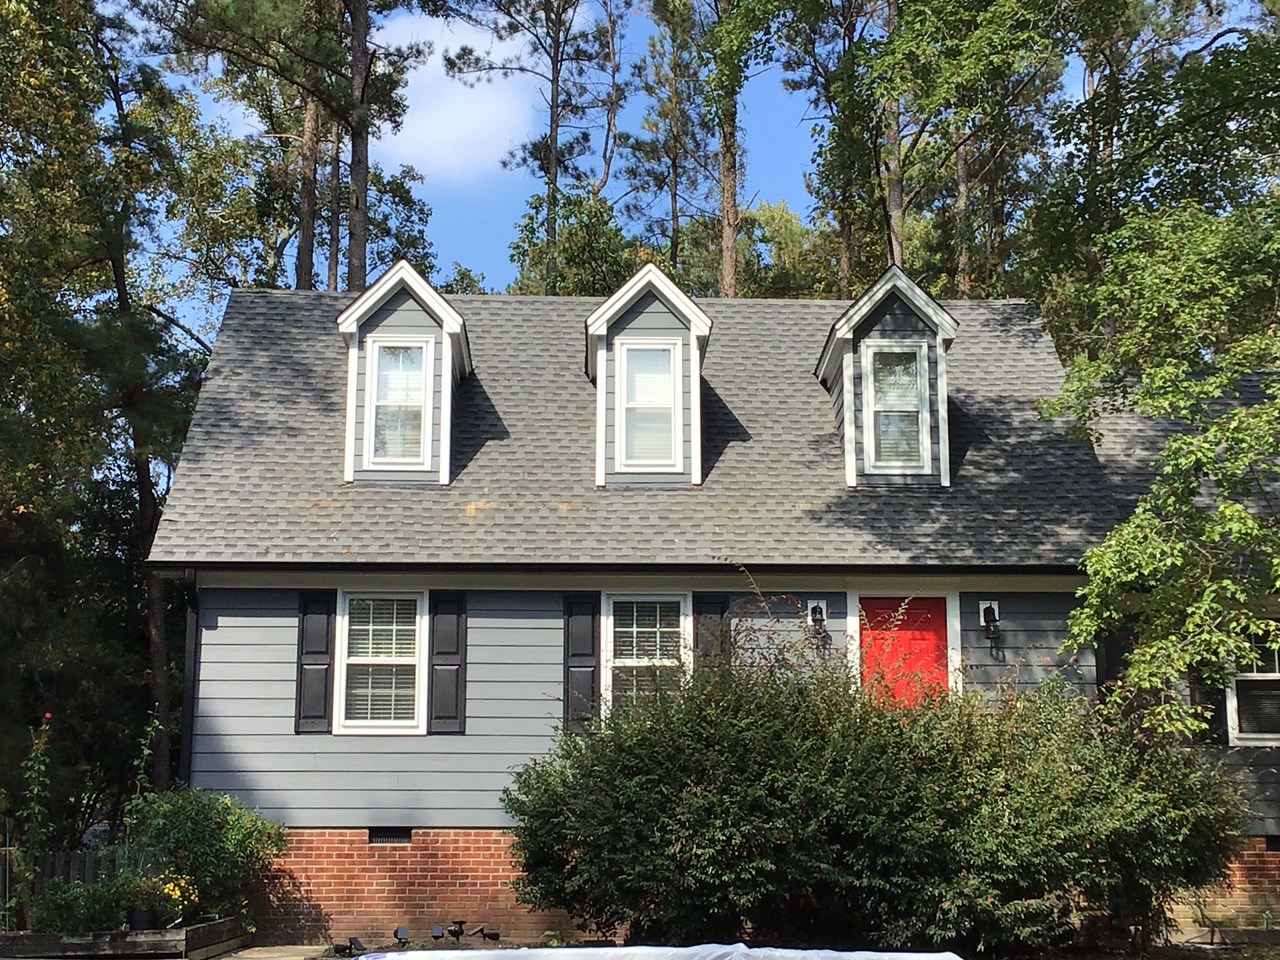 Peggy T. – Cary James Hardie Siding Replacement